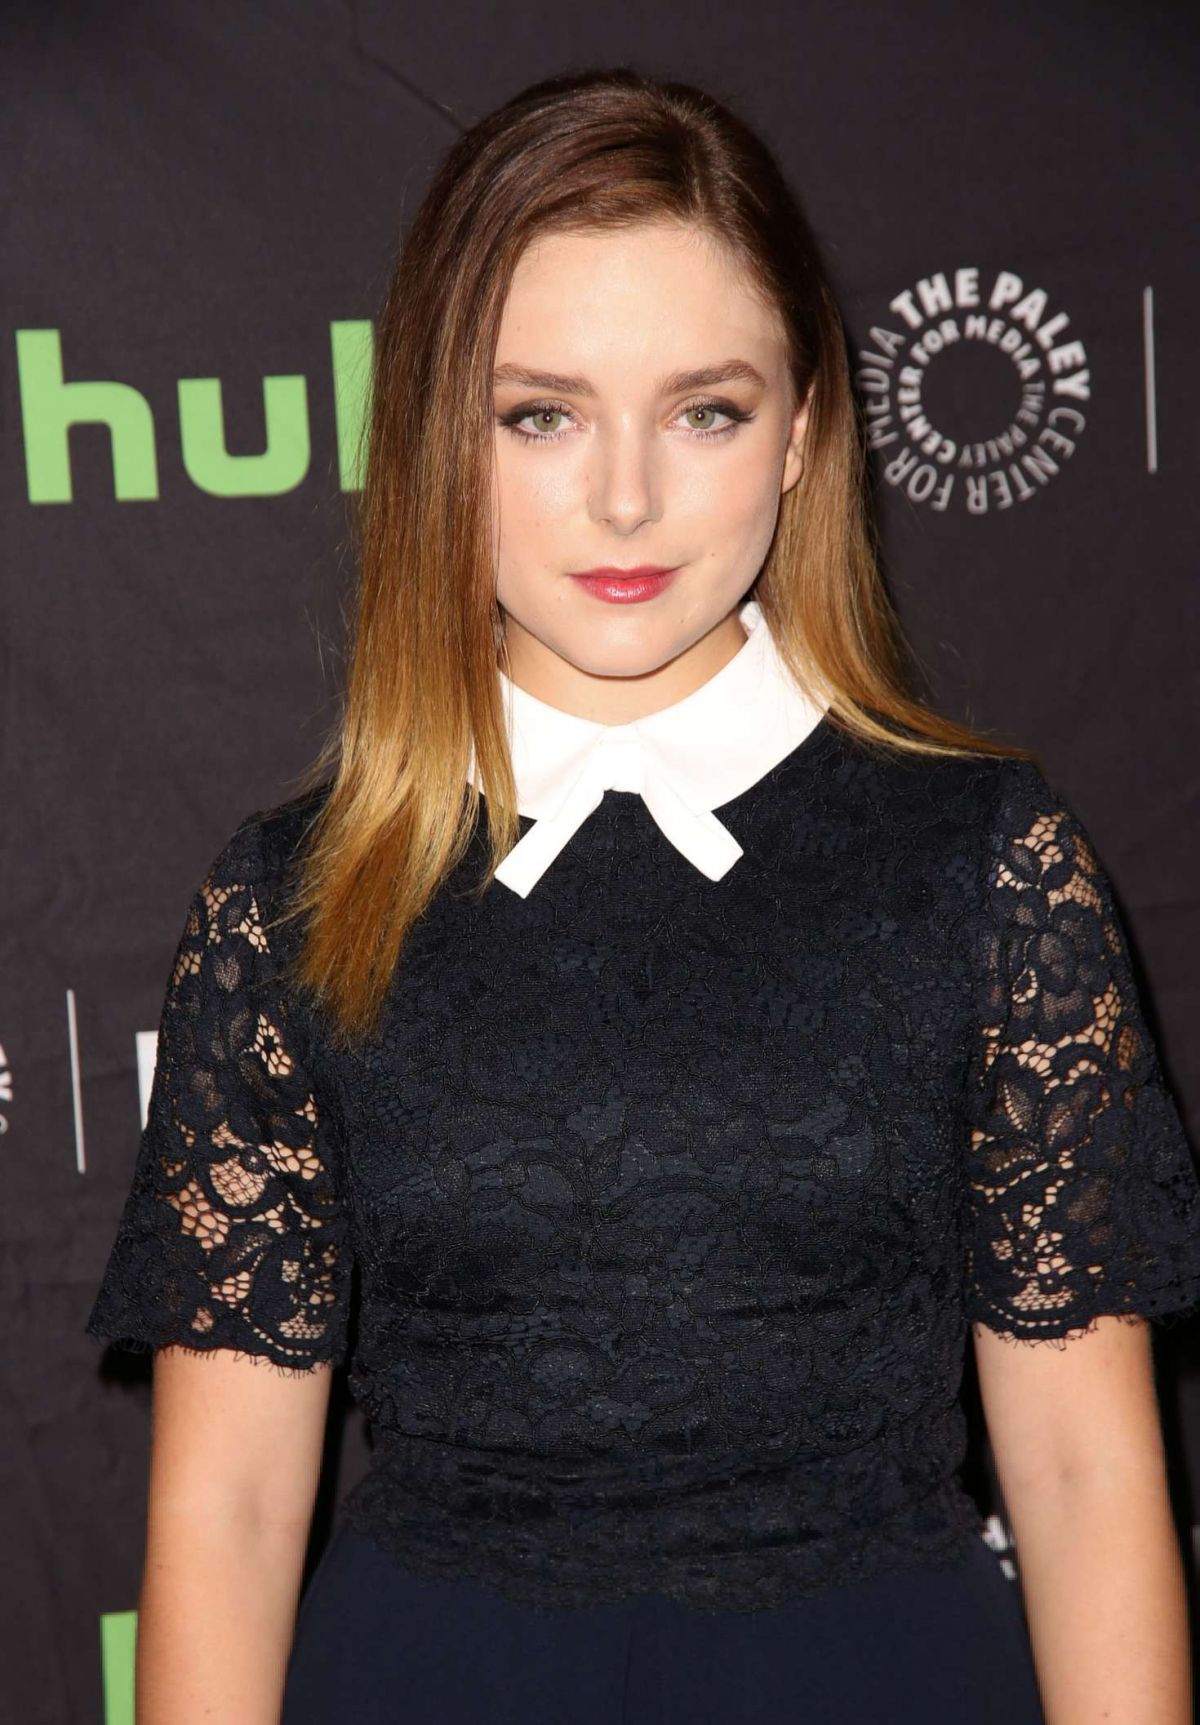 MADISON DAVENPORT at Paleyfest 2016 Fall TV Preview for CBS in Beverly Hills 09/12/2016